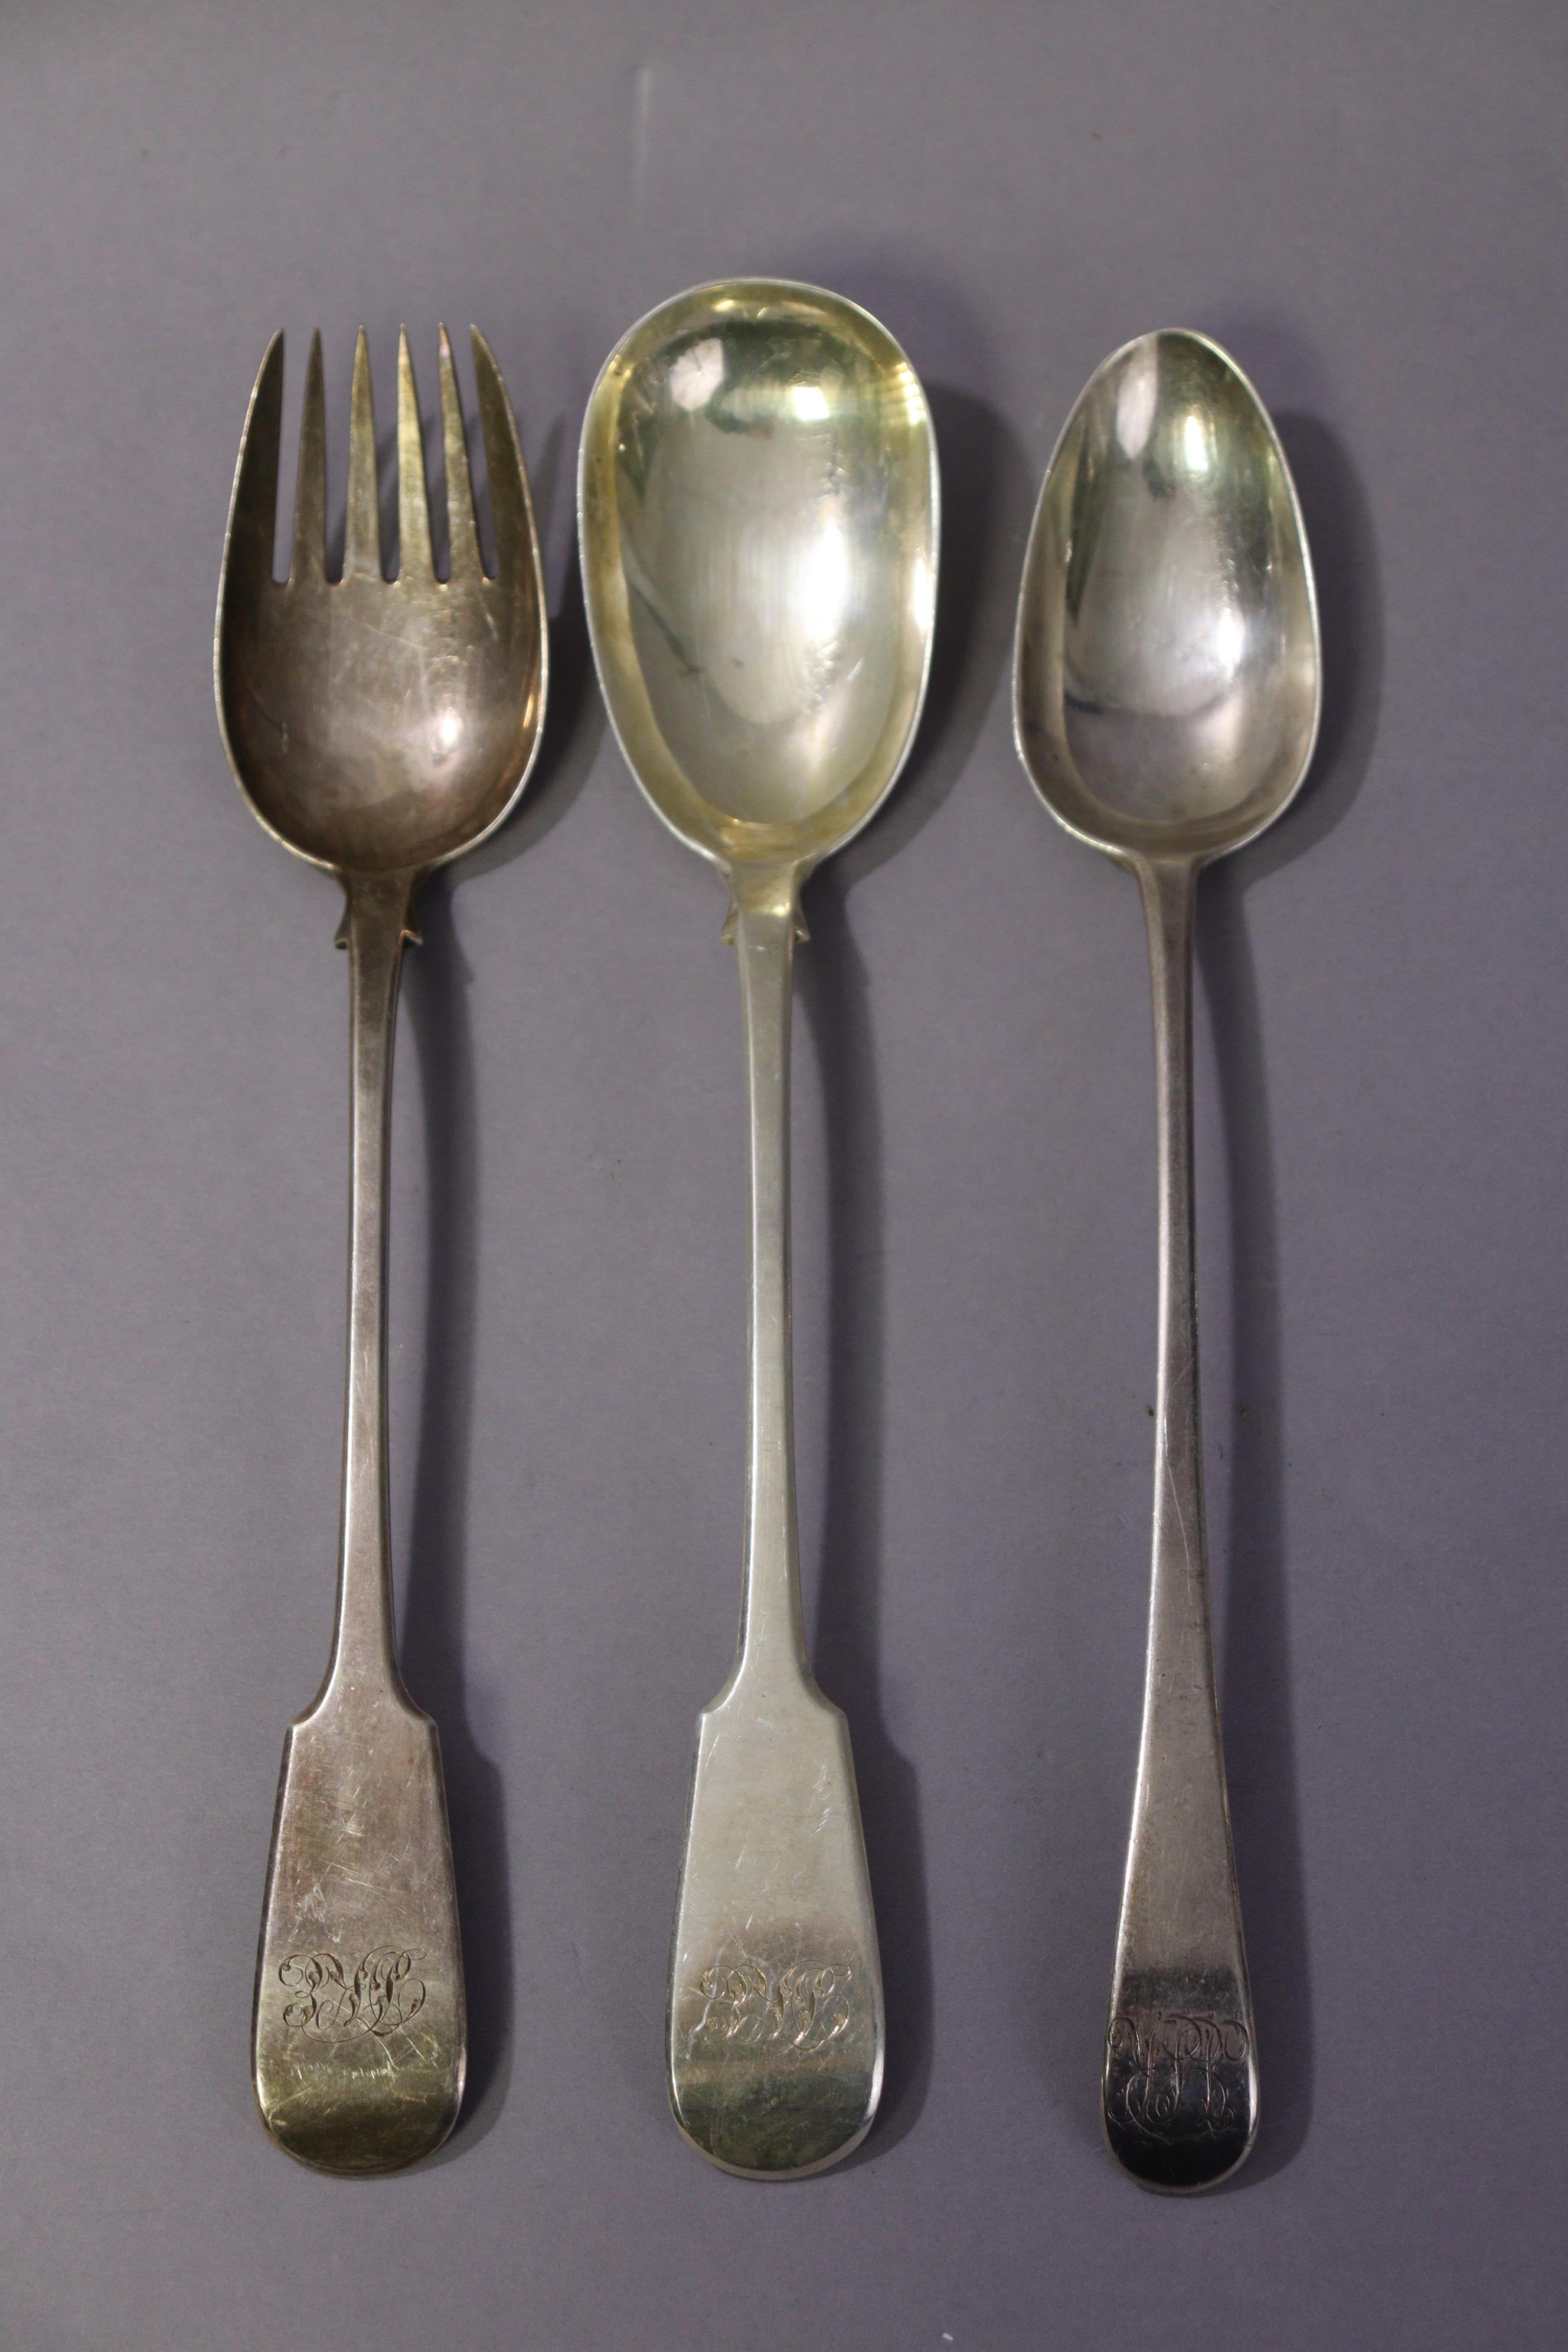 A pair of George IV silver Fiddle pattern salad servers, London 1824 by Wm. Eley & Wm. Fearn (over-